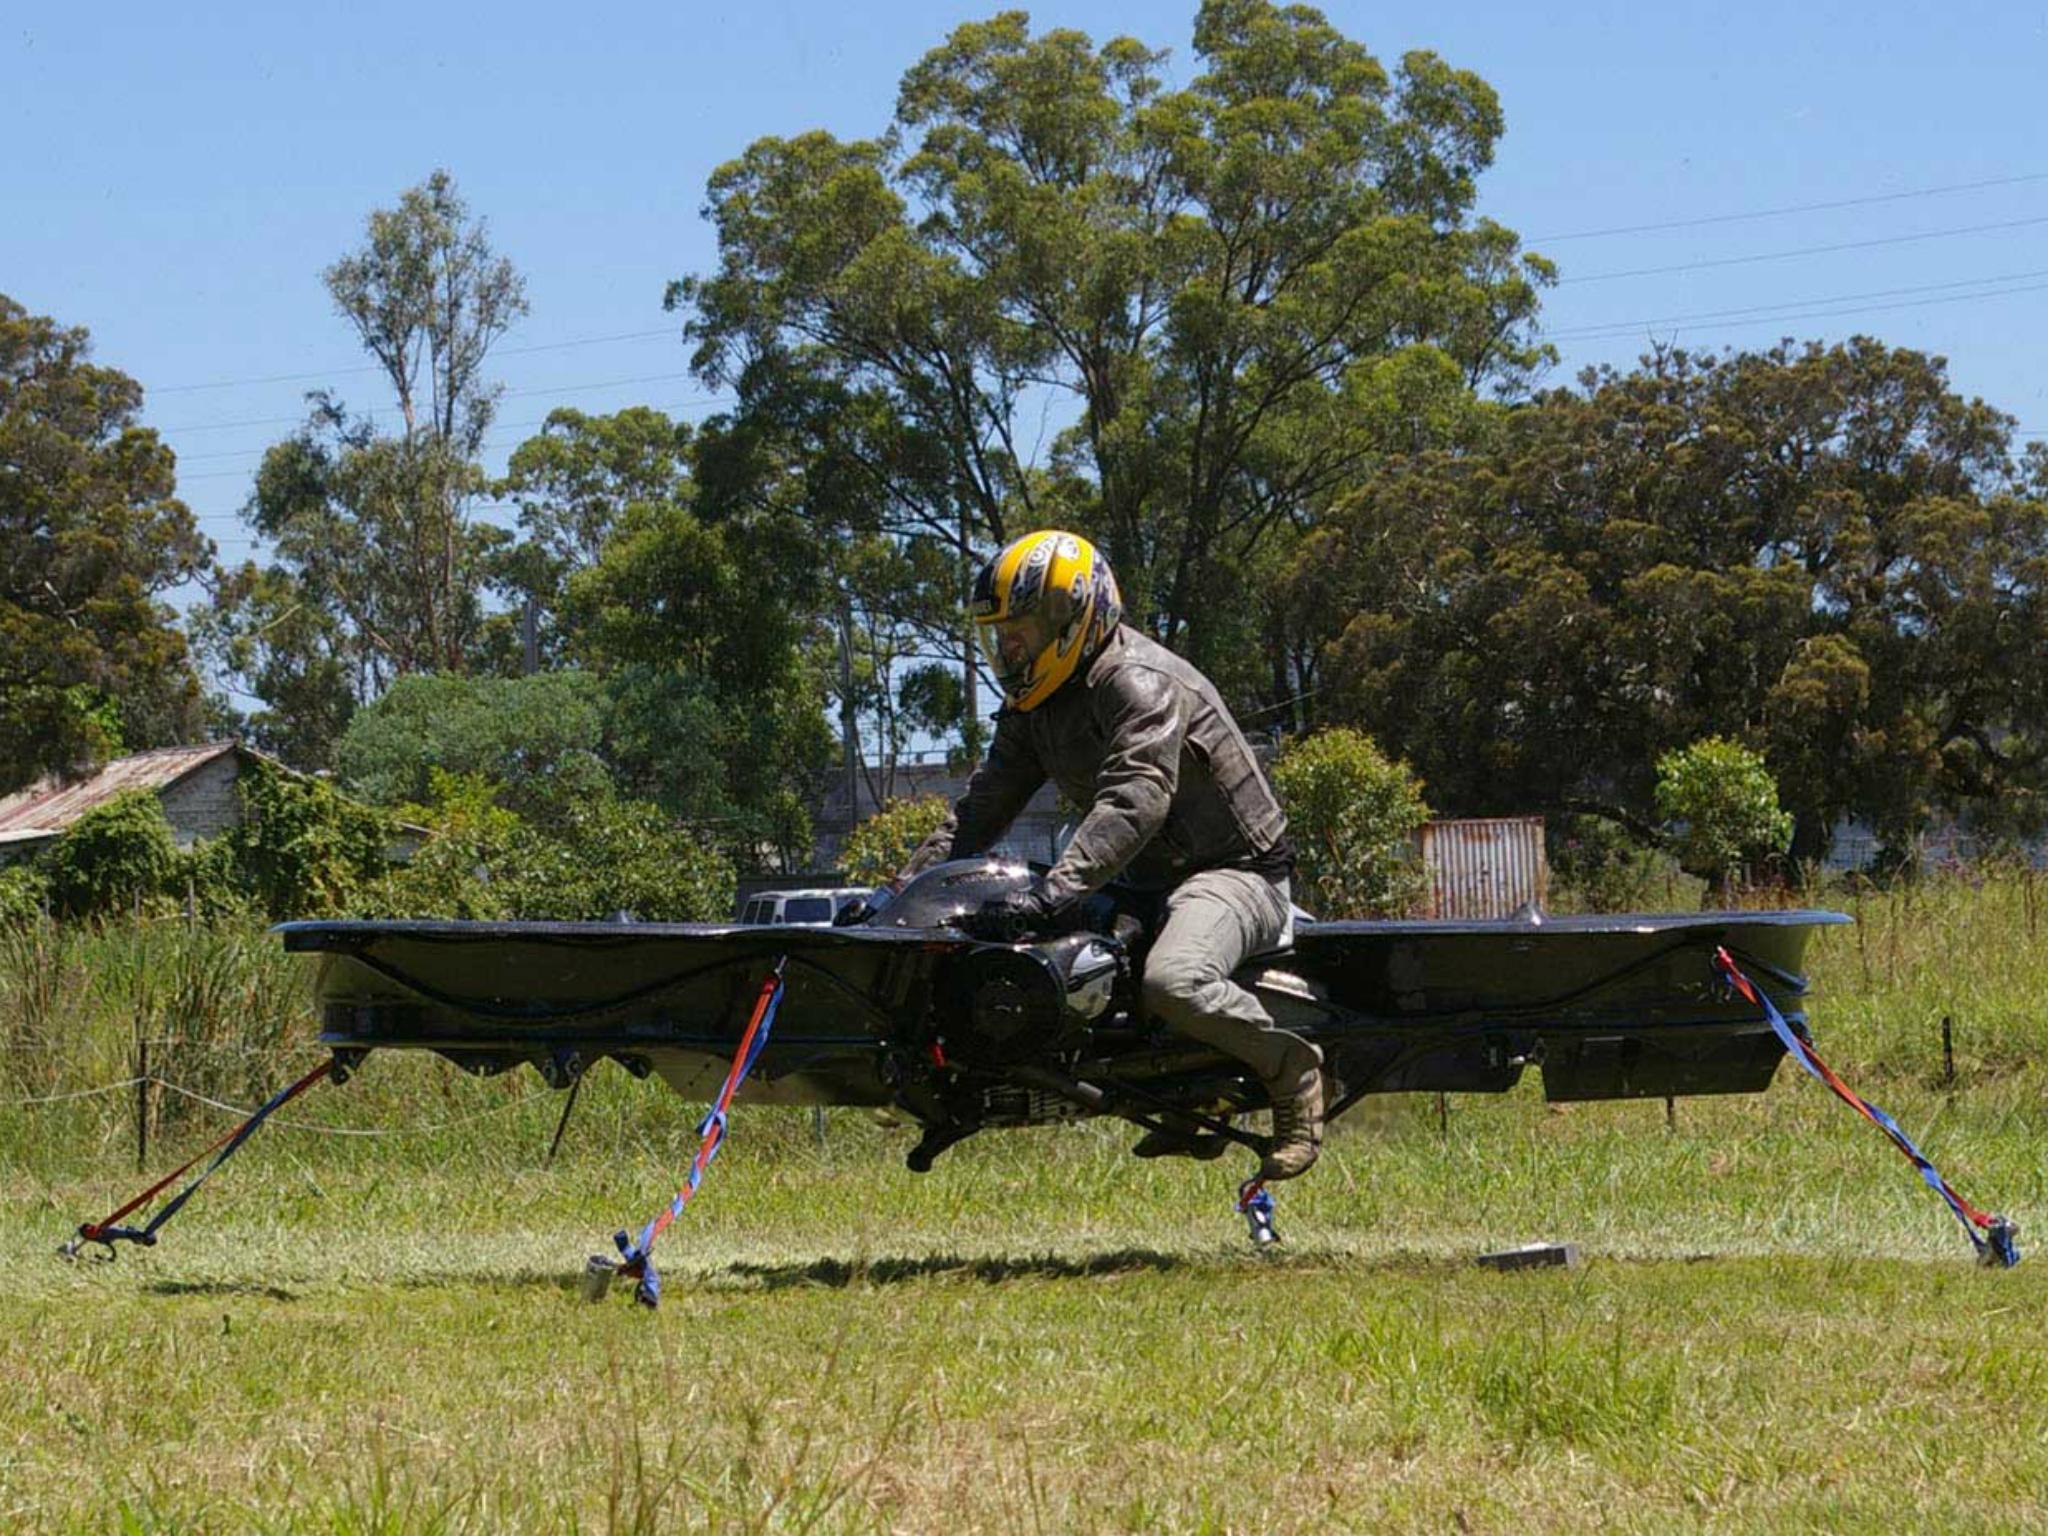 The US Army wants it to be capable of flying low to the ground or at thousands of feet, at 60mph